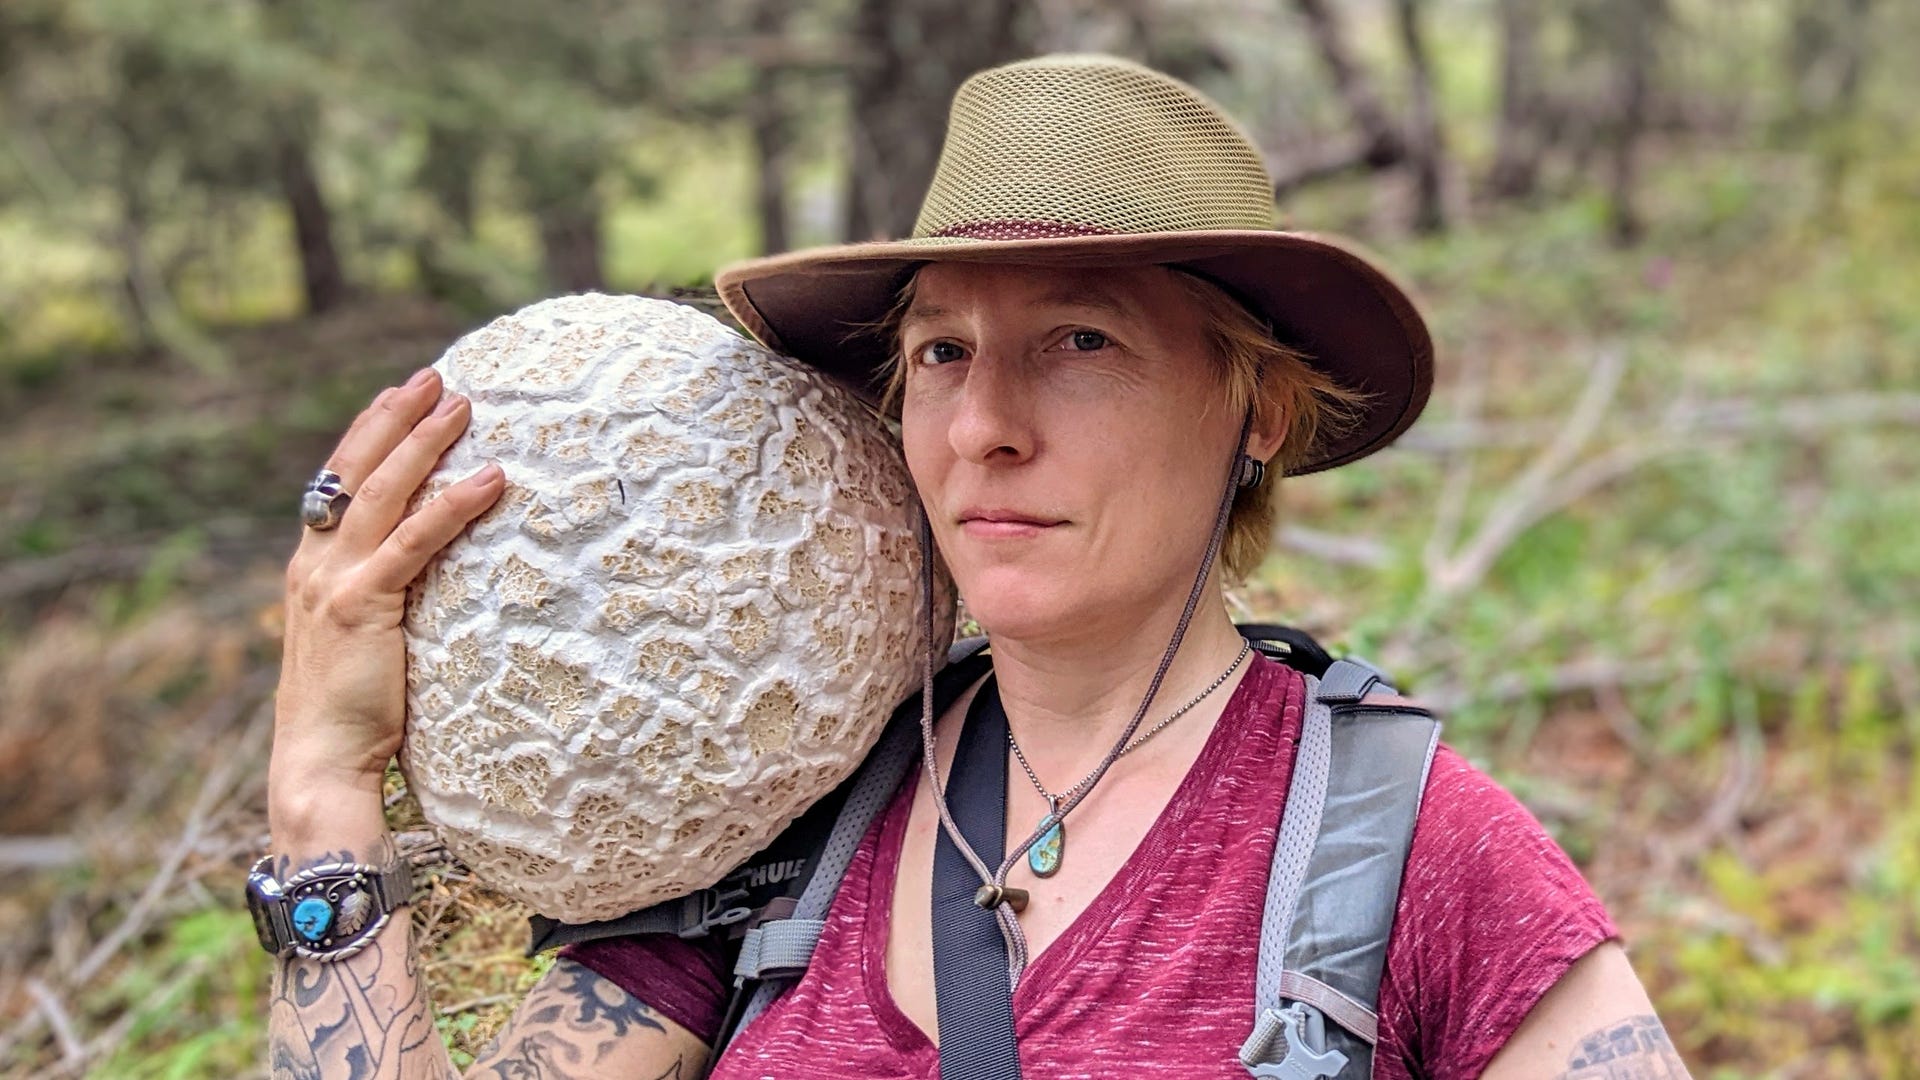 A mushroom forager in a red shirt and brown hat holds a massive crackled-looking round puffball mushroom on her shoulder.